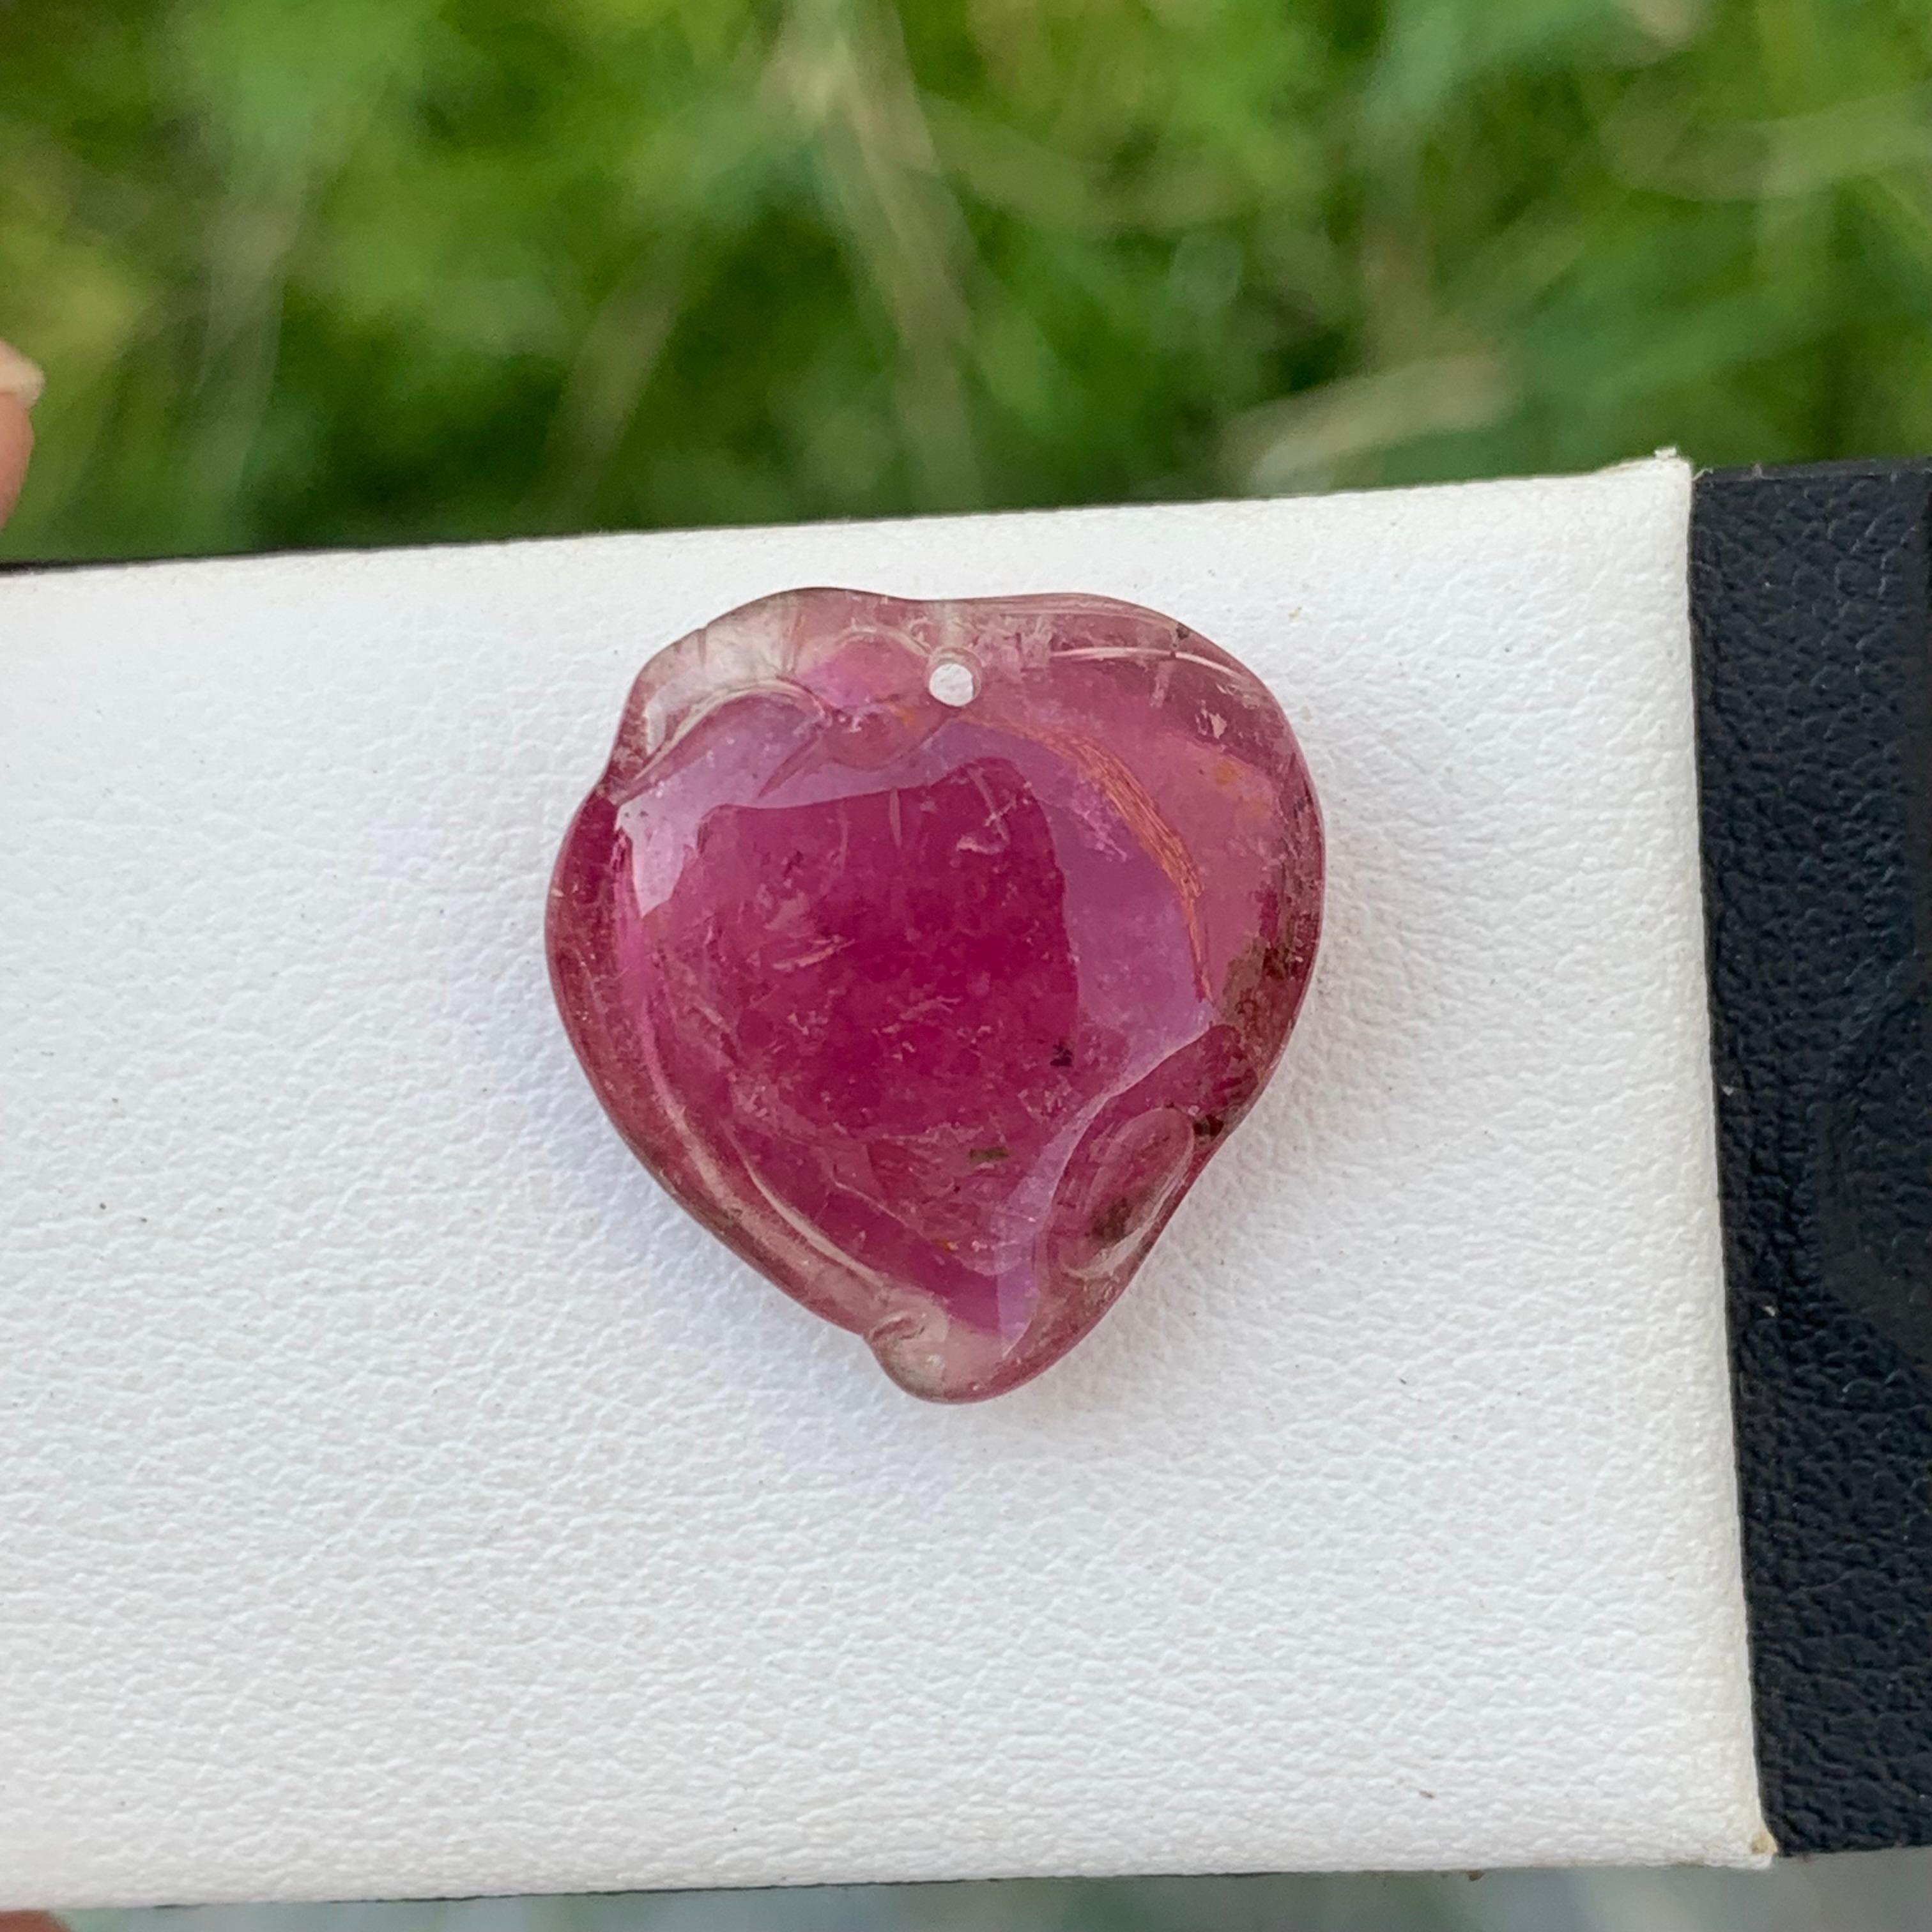 14.65 Carat Loose Heart Shape Tourmaline Drilled Carving from Africa For Sale 2